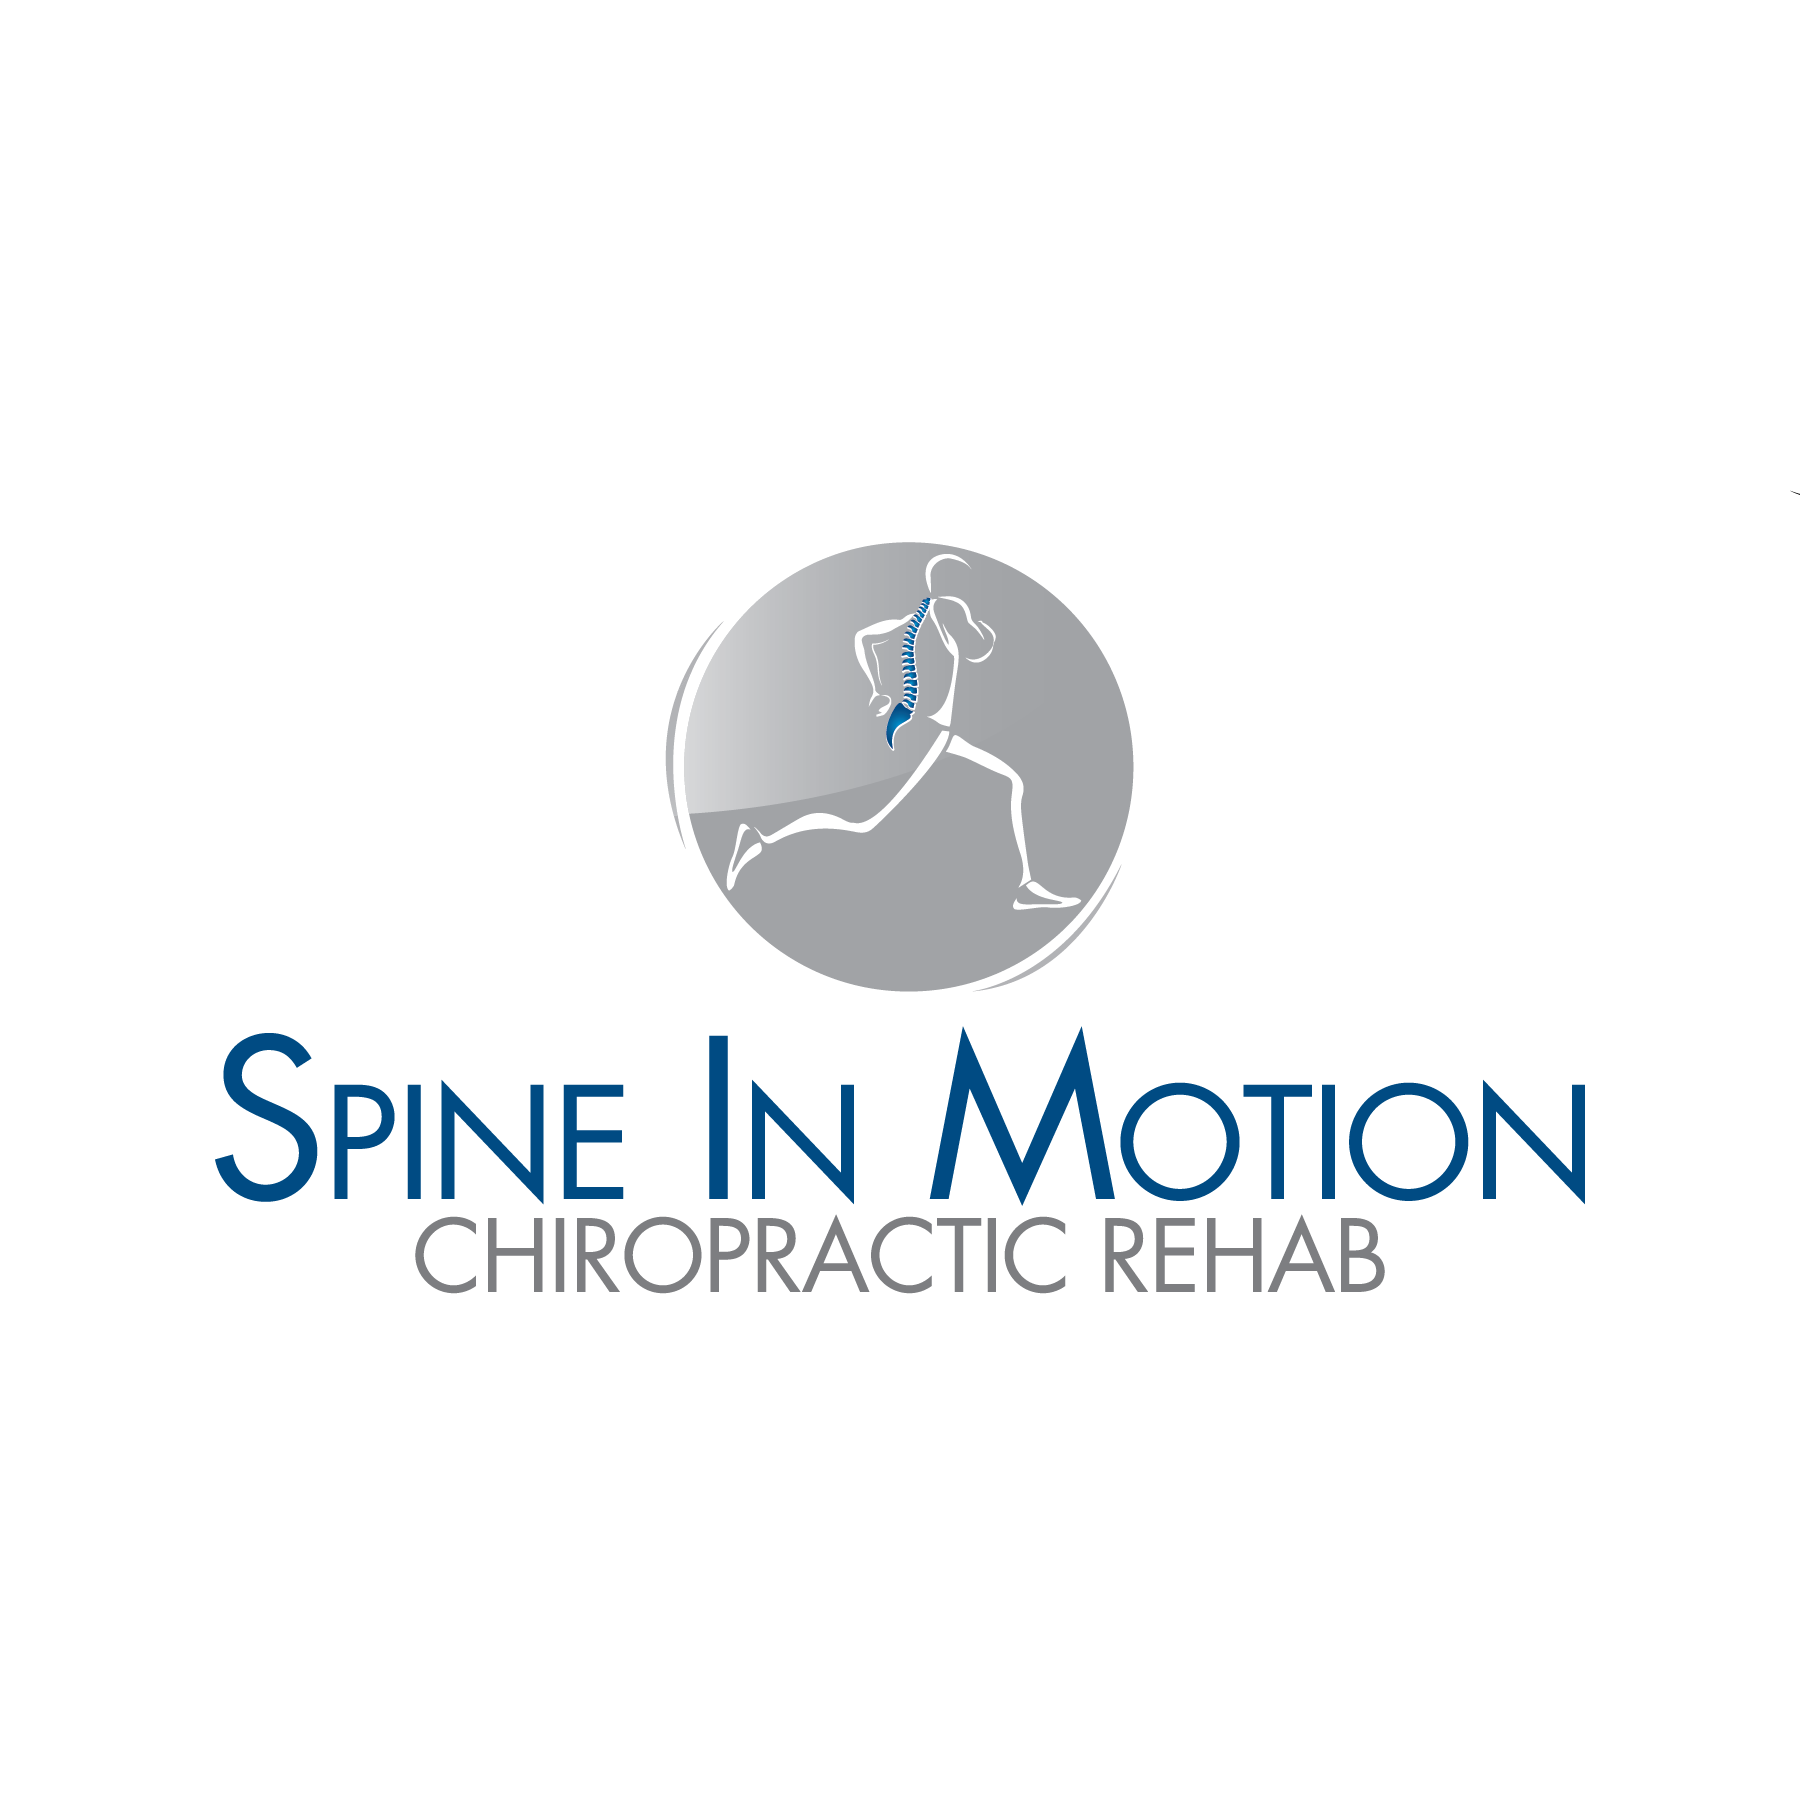 Spine In Motion Chiropractic Rehab - San Antonio, TX 78228 - (210)920-4958 | ShowMeLocal.com